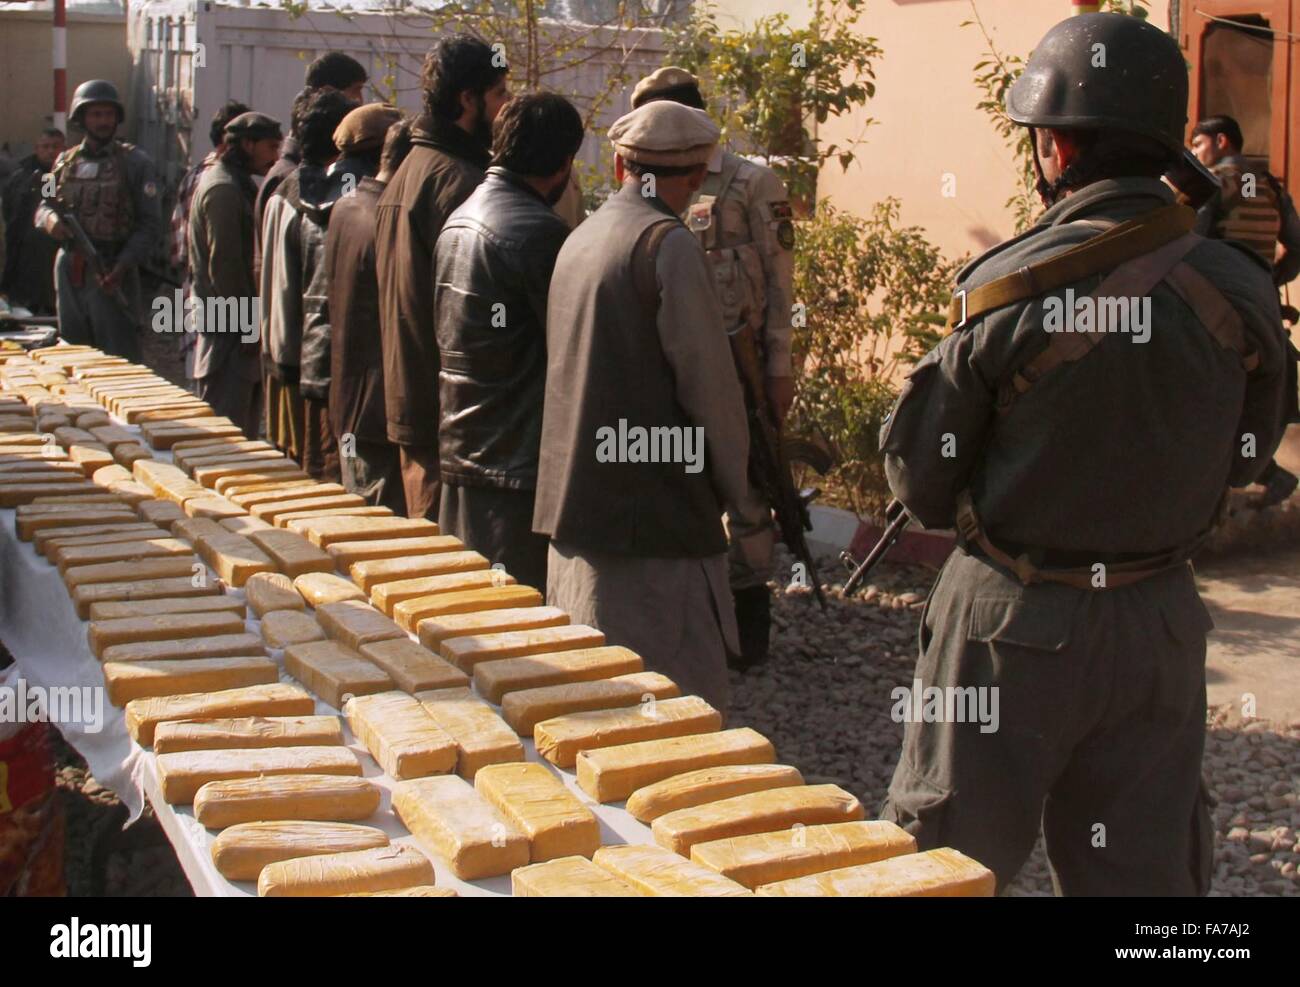 Nangarhar, Afghanistan. 23rd Dec, 2015. Drug smugglers stand handcuffed after being captured during an operation in Nangarhar province, eastern Afghanistan, Dec. 23, 2015. Afghan national police captured 10 drug smugglers with 254kg drugs during an operation in Nangarhar province on Wednesday. Credit:  Rahman Safi/Xinhua/Alamy Live News Stock Photo